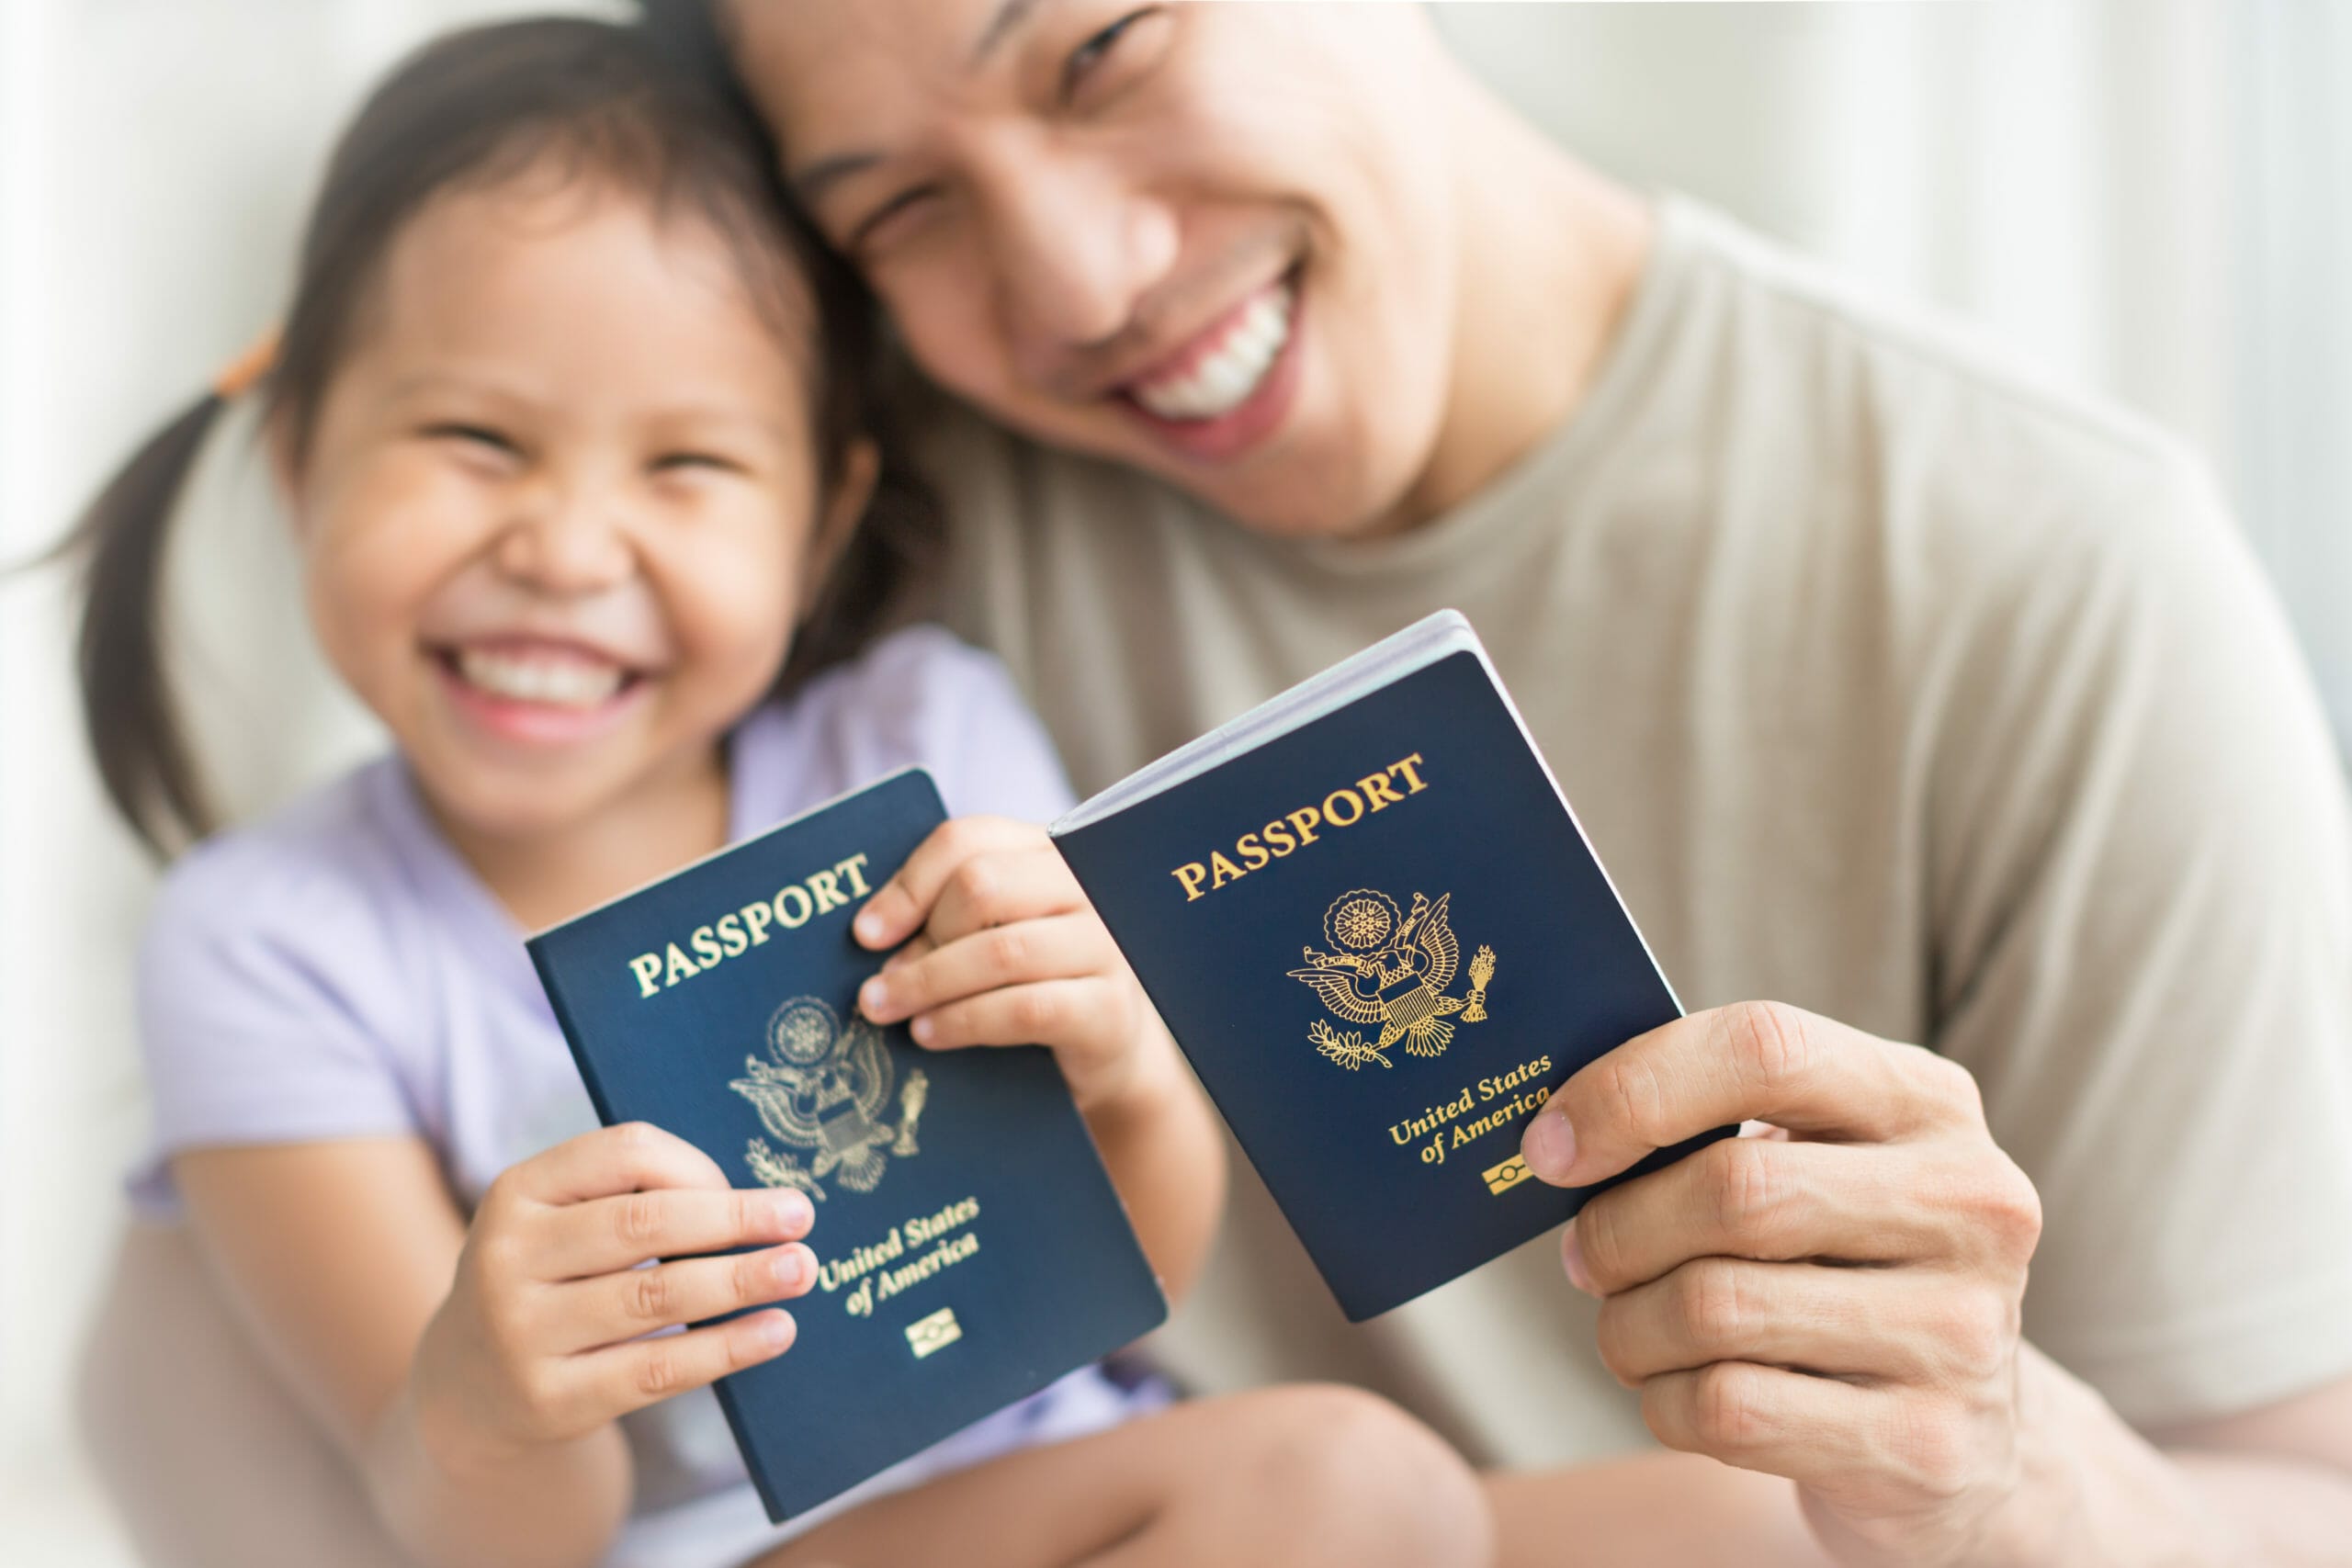 Asian dad and daughter holding amercian passports with pride. Immigration citizenship 